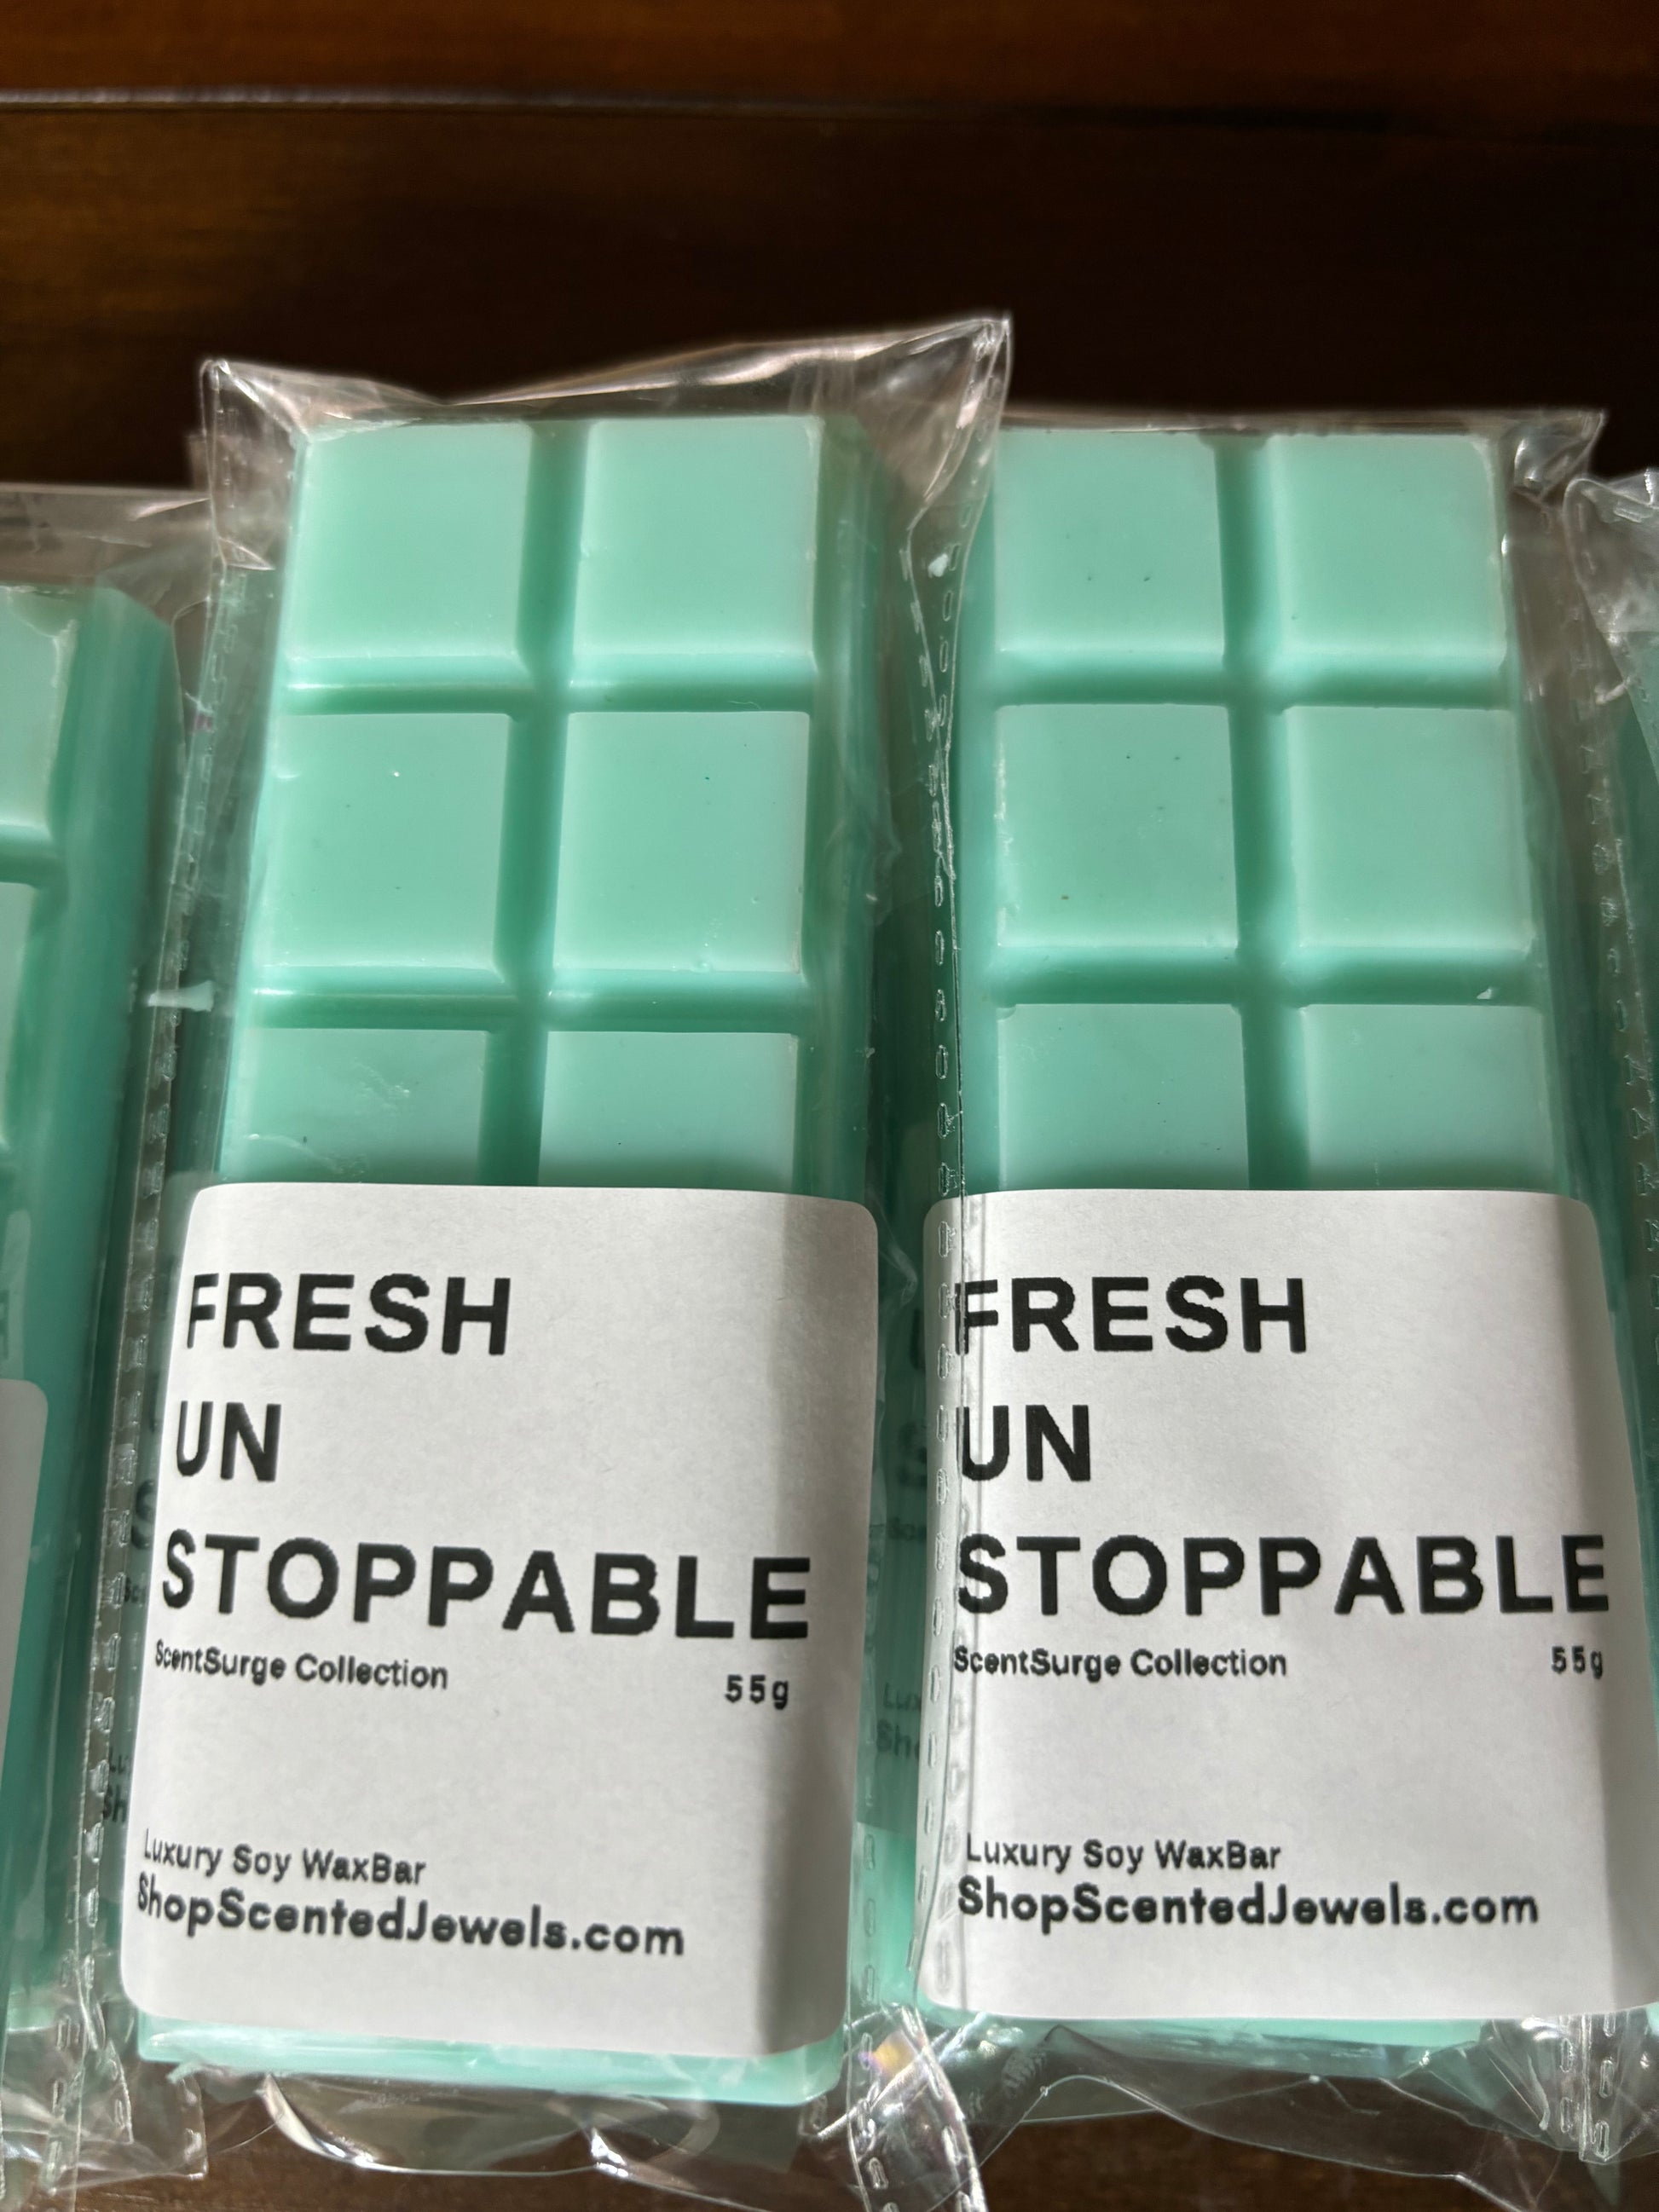 Bliss Unstoppable Laundry Scented Wax Melt Snap Bar, Bliss Unstoppable  Laundry Scented Wax, Soy Wax Melts, Wax Snap Bar, Washing Scented Wax Melts,  Fresh Scent Wax Melts – DollyBird Design Co.